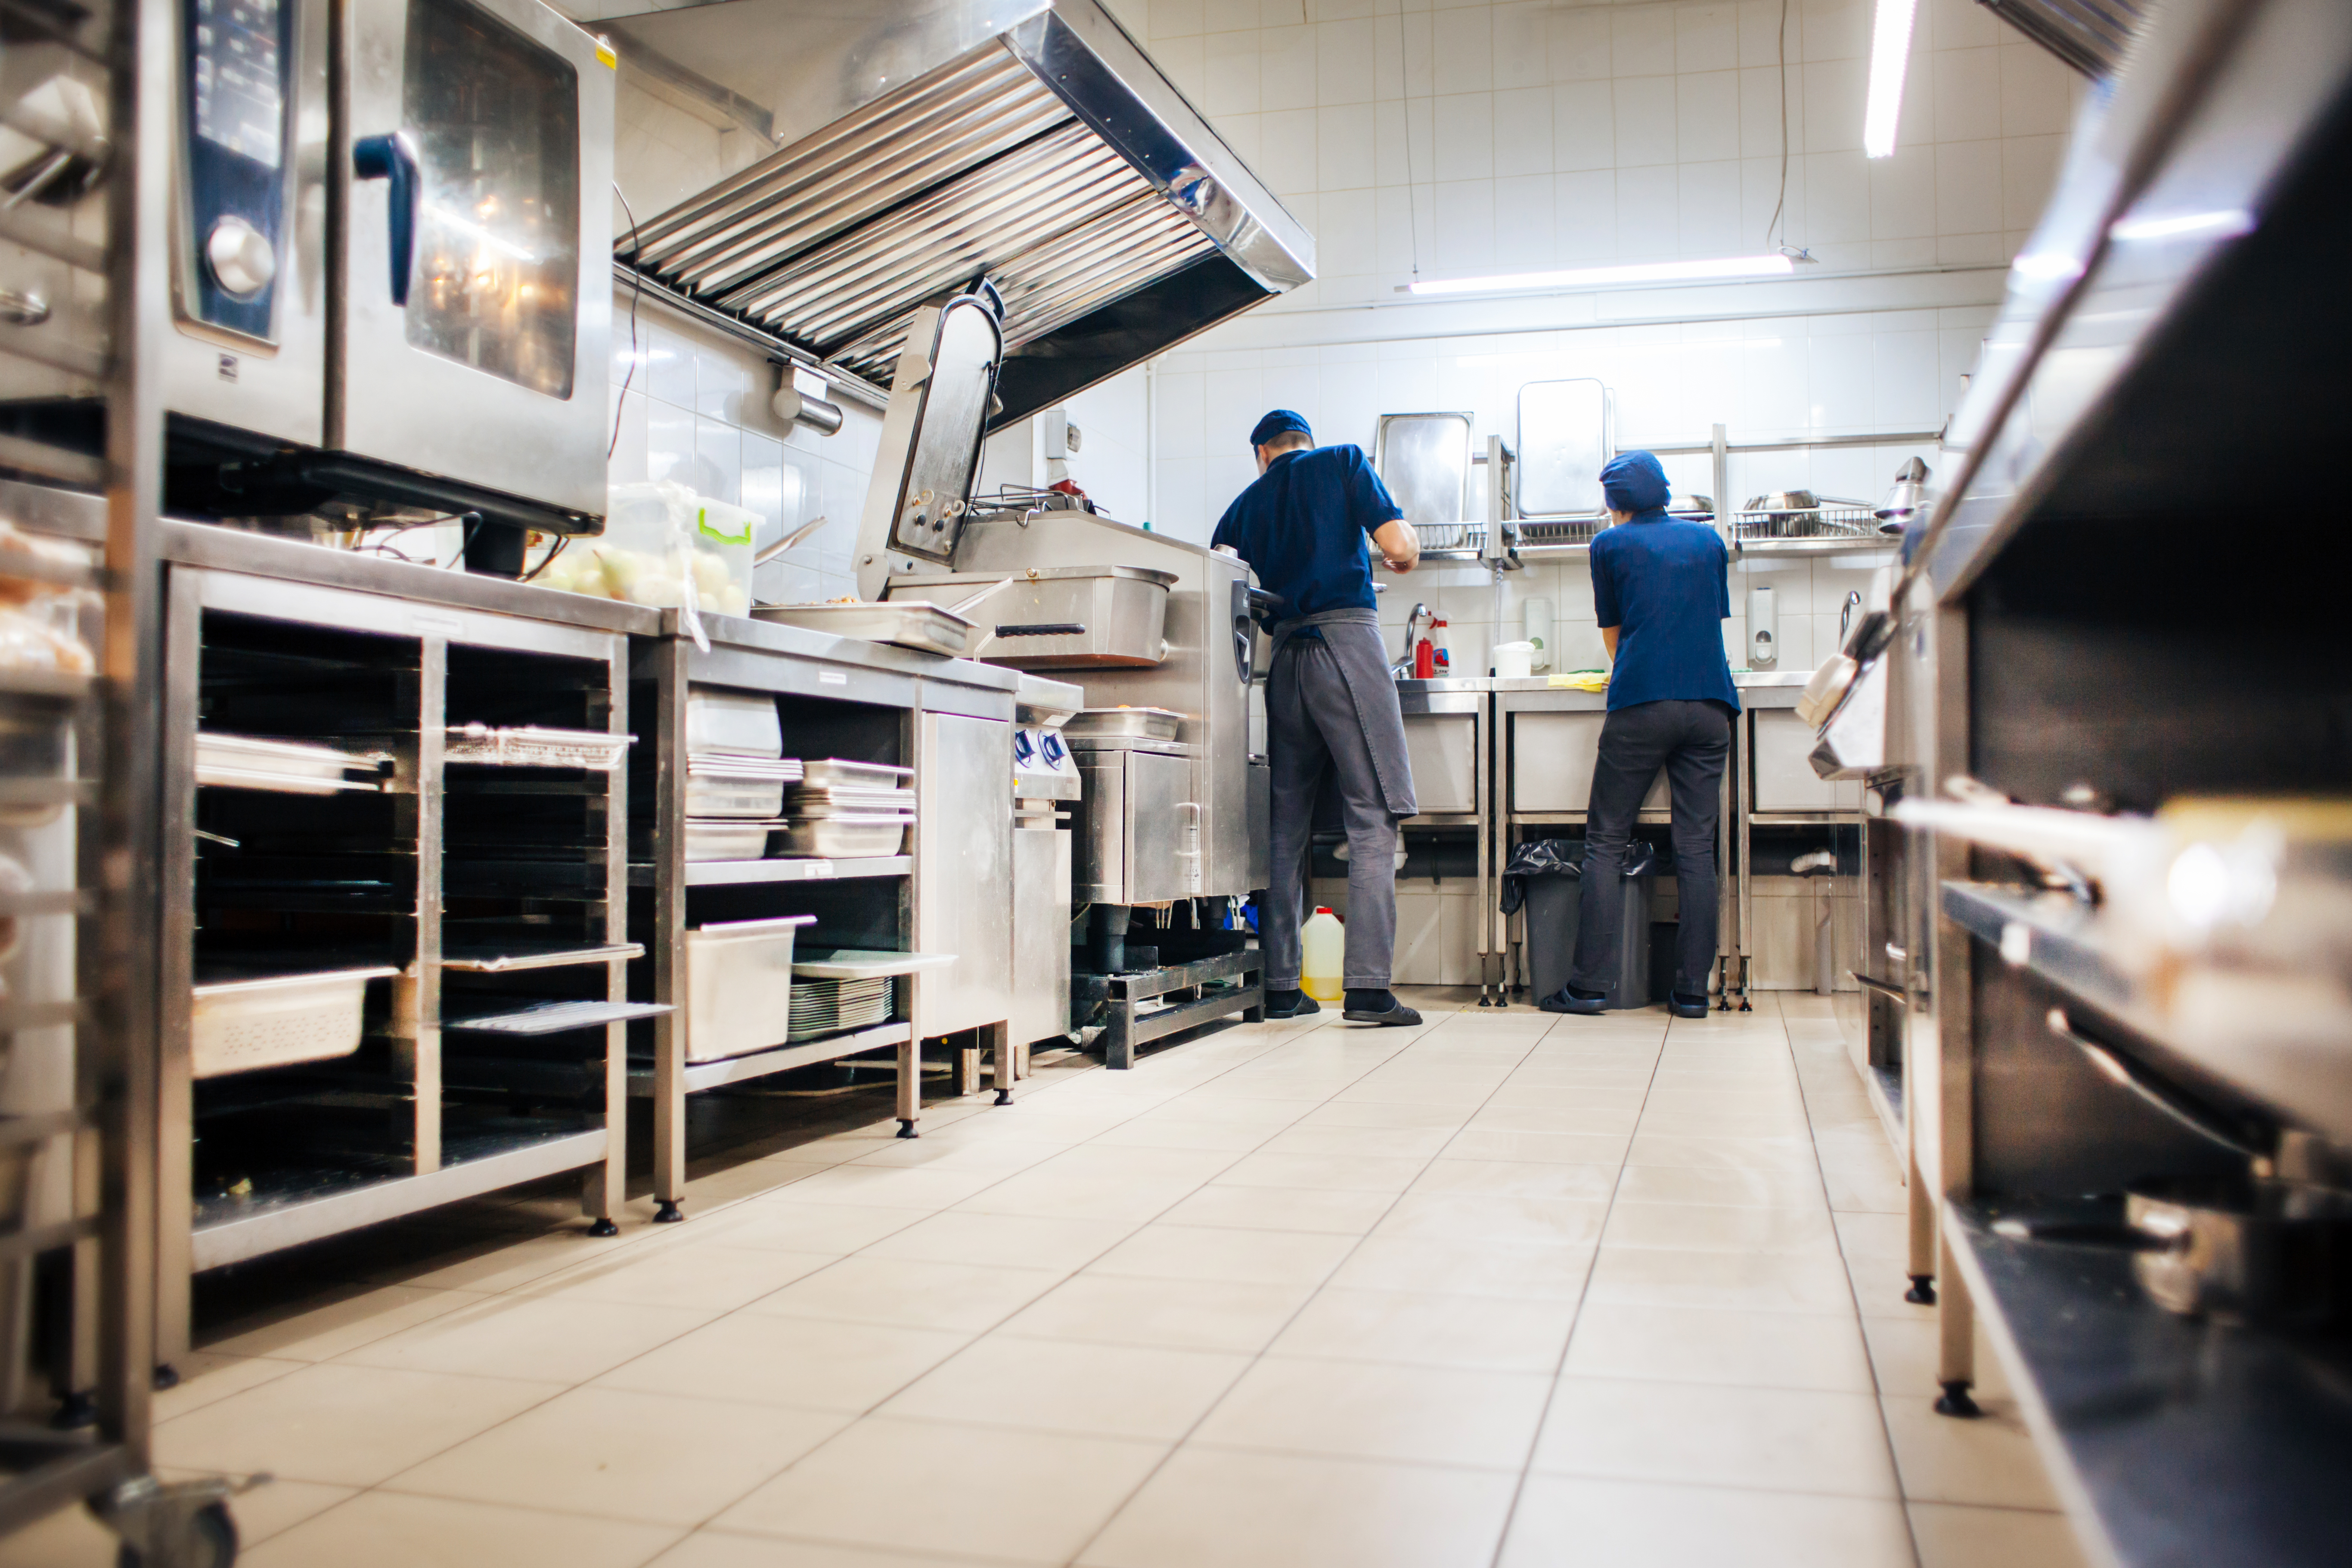 Service technicians in commercial kitchen